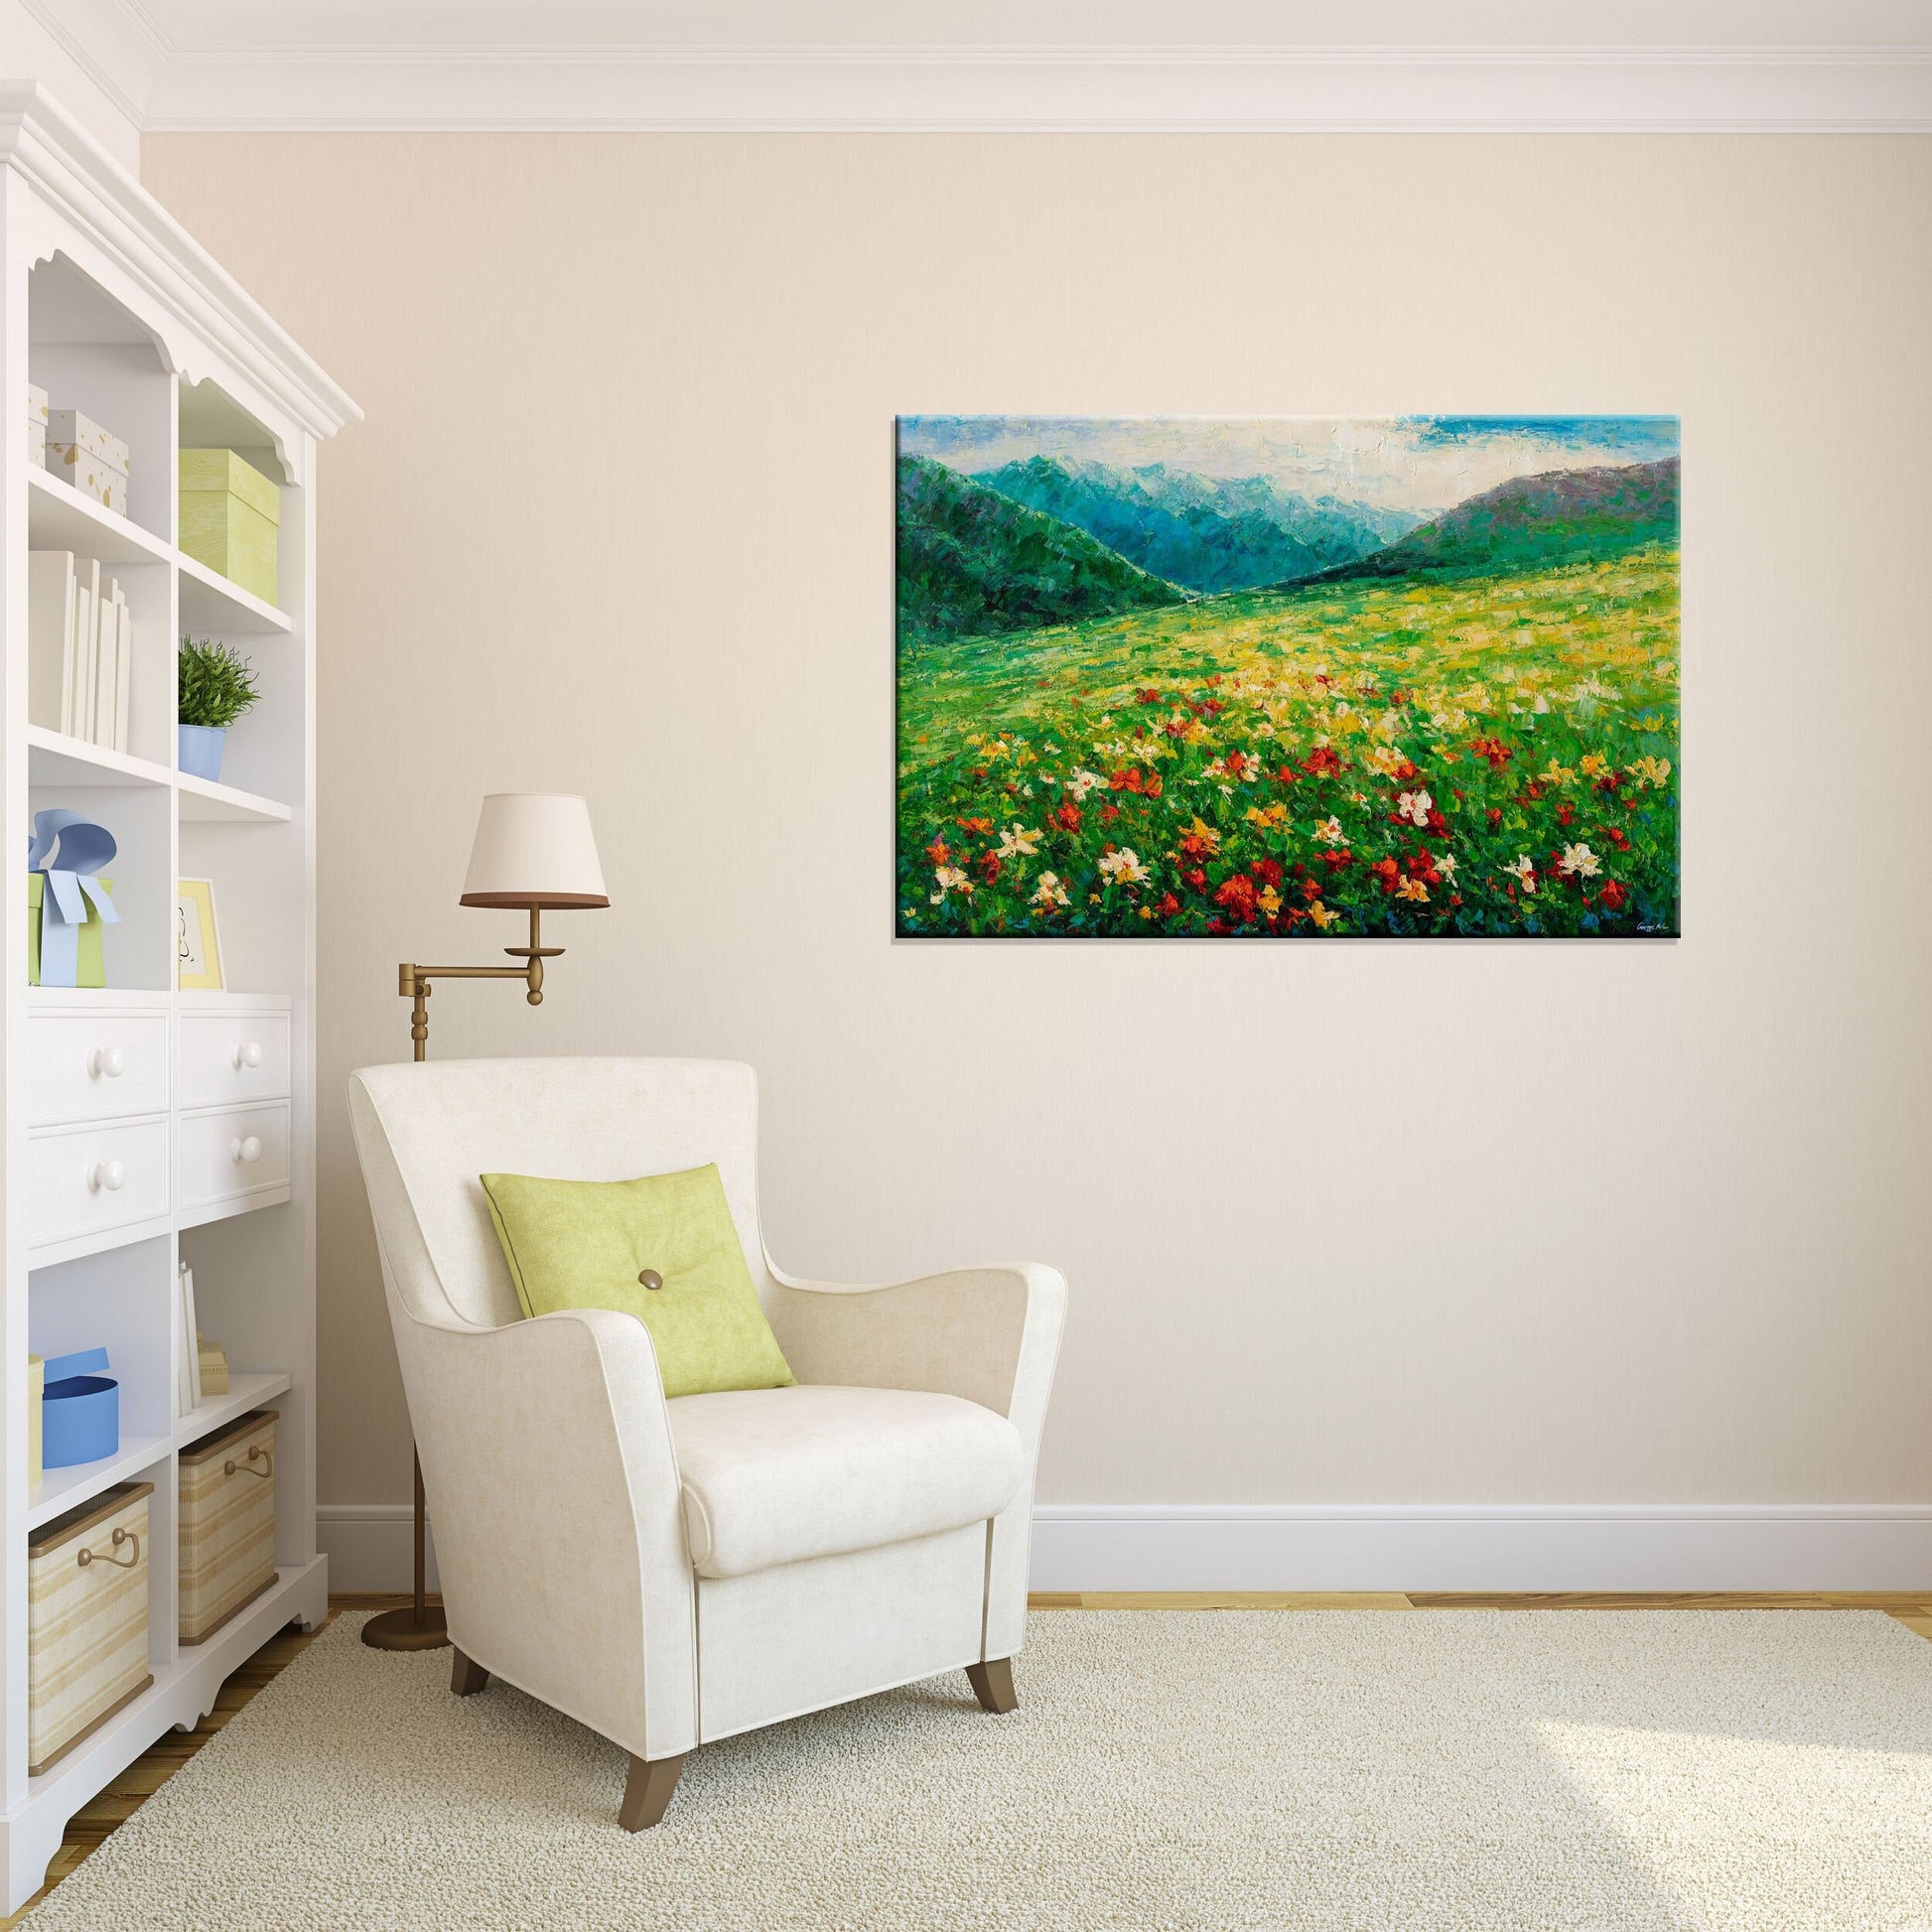 Ready to Hang Canvas Art: George Miller's Impasto Oil Painting of Spring Fields - Original Landscape Oil Paintings, Modern Painting